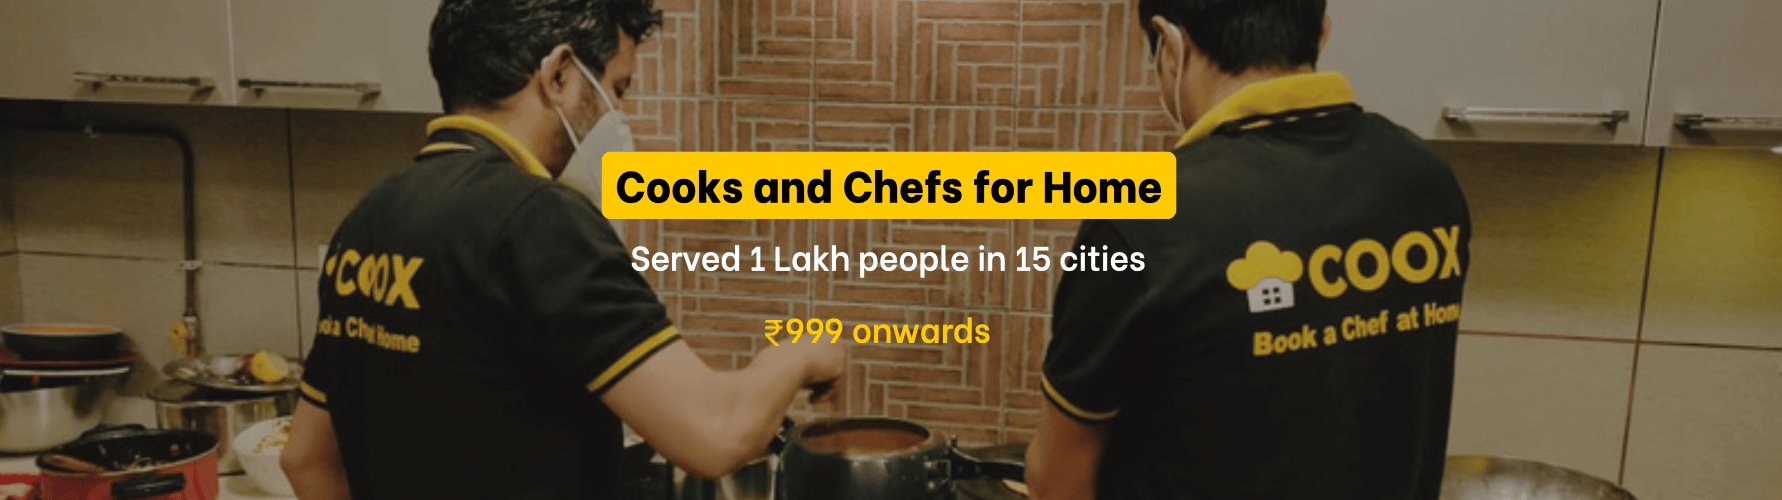 Cooks and Chefs at Home